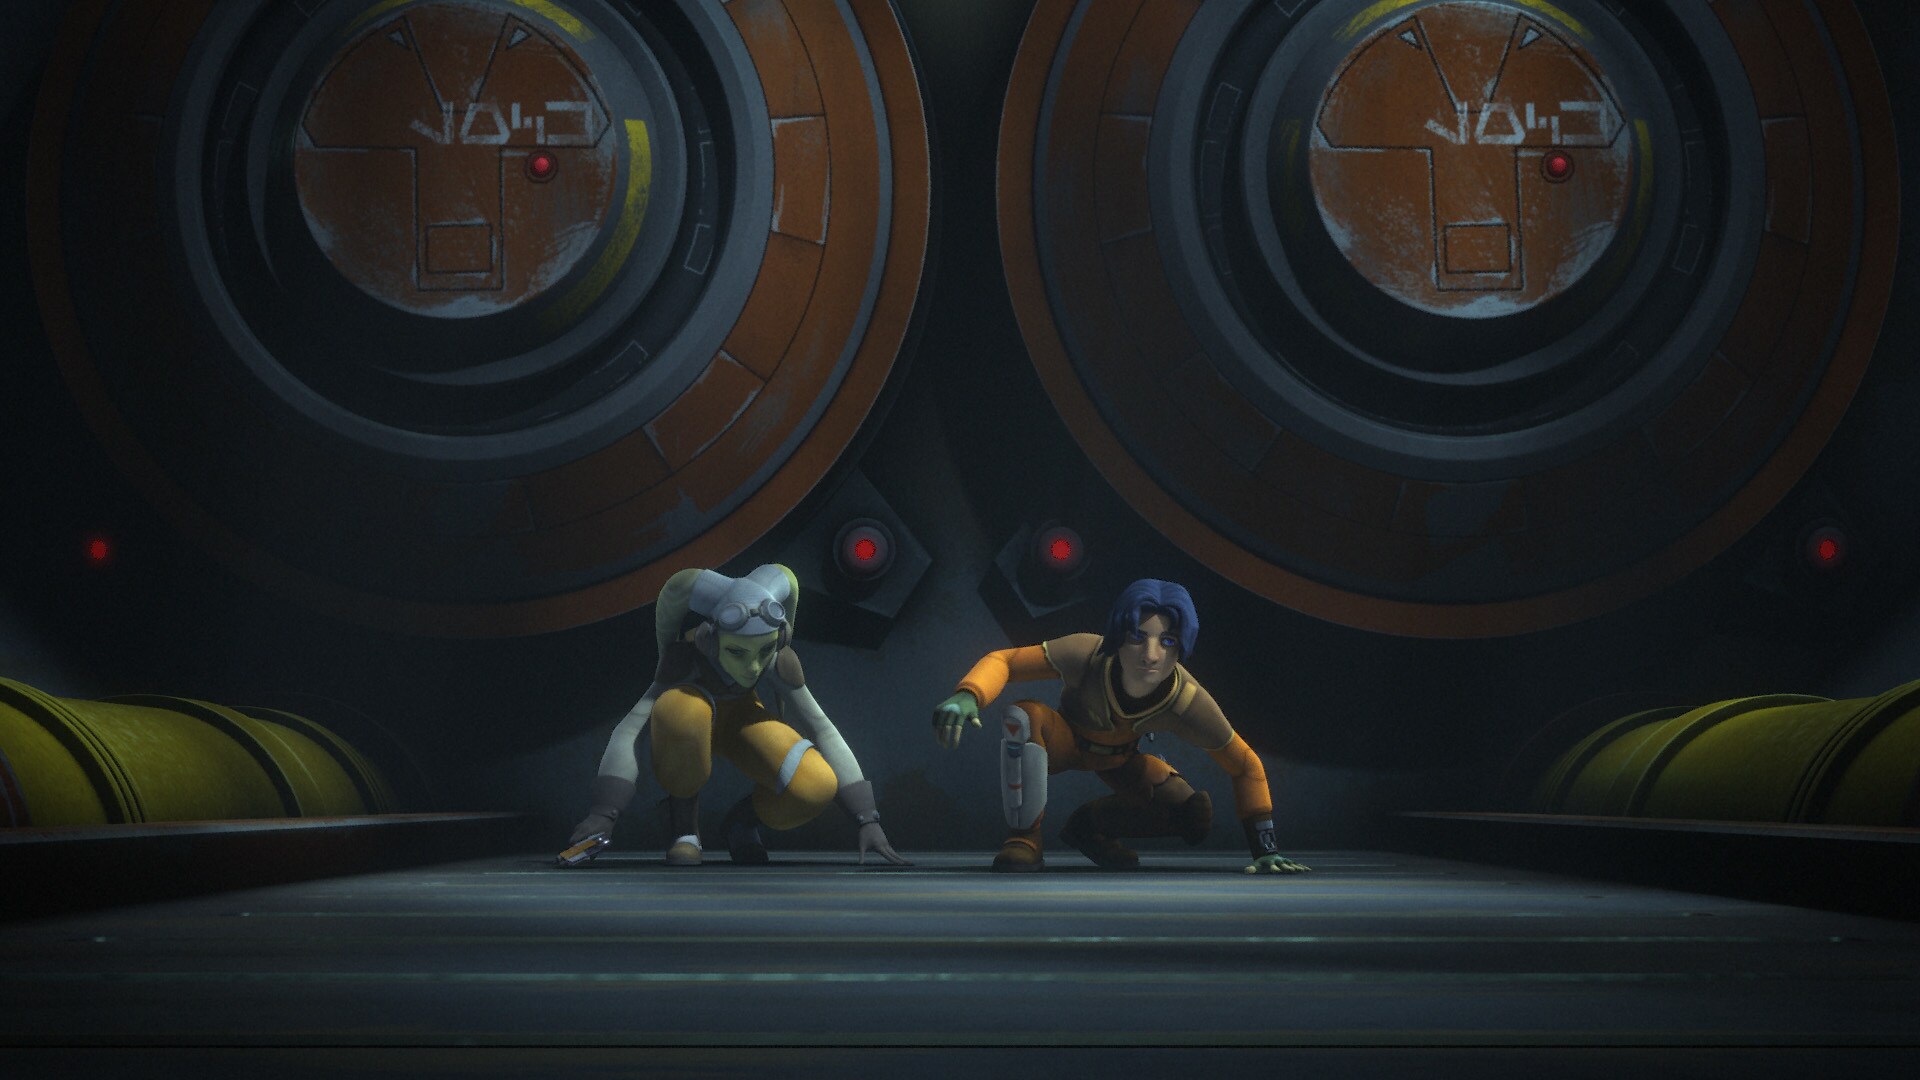 The Aurebesh lettering on the sewer pipe seals says “LOCK” on it.